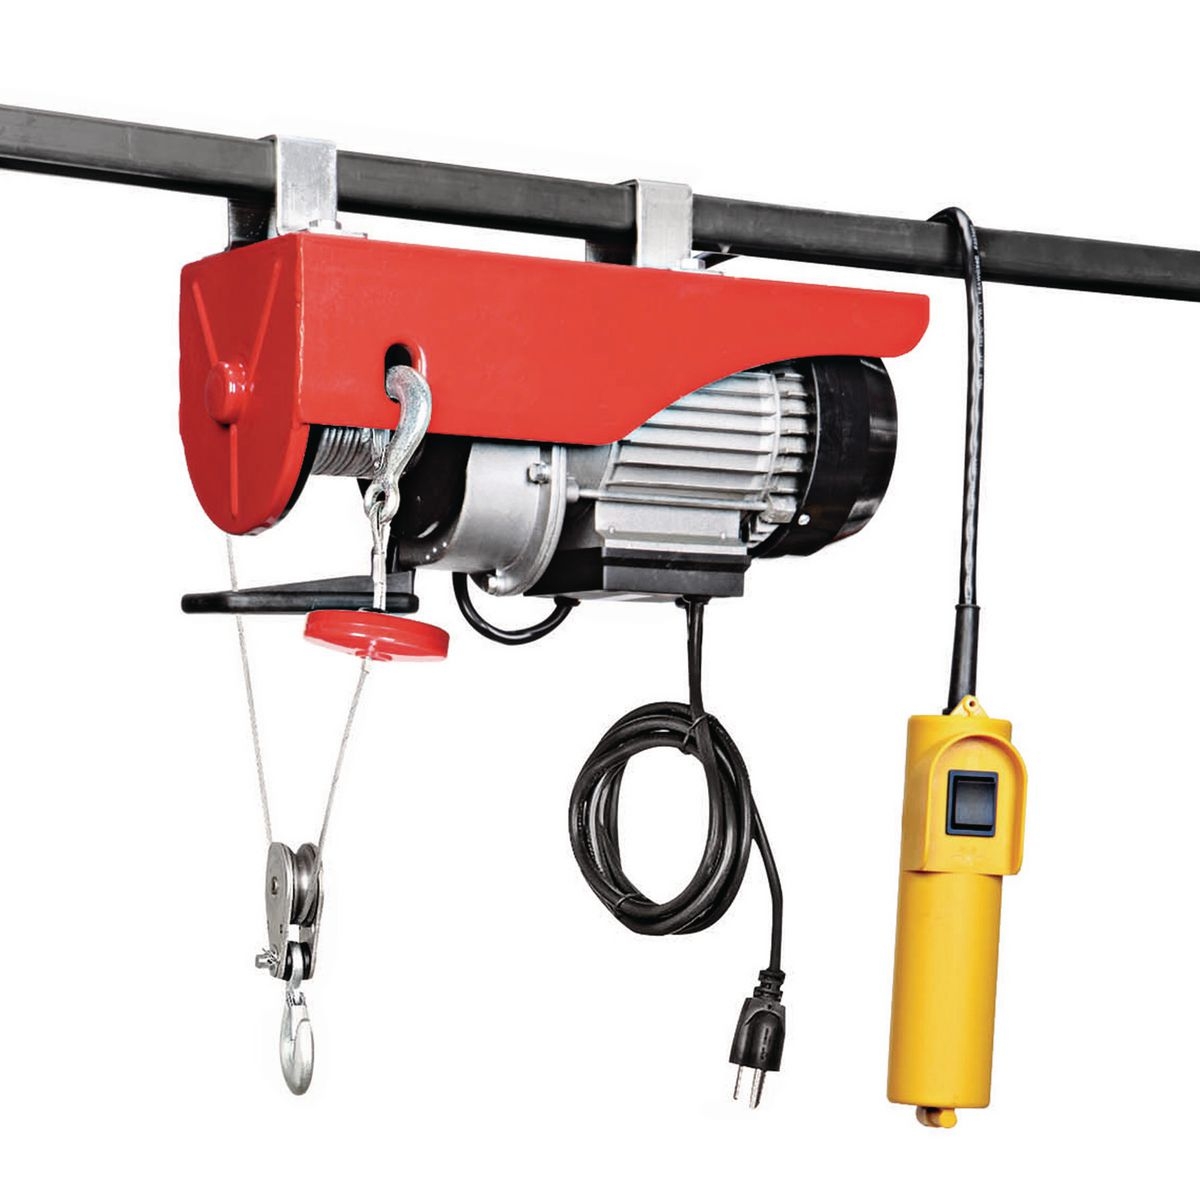 PITTSBURGH AUTOMOTIVE 440 lb. Electric Hoist with Remote Control - Item 60346 / 40765 / 60385 / 62767